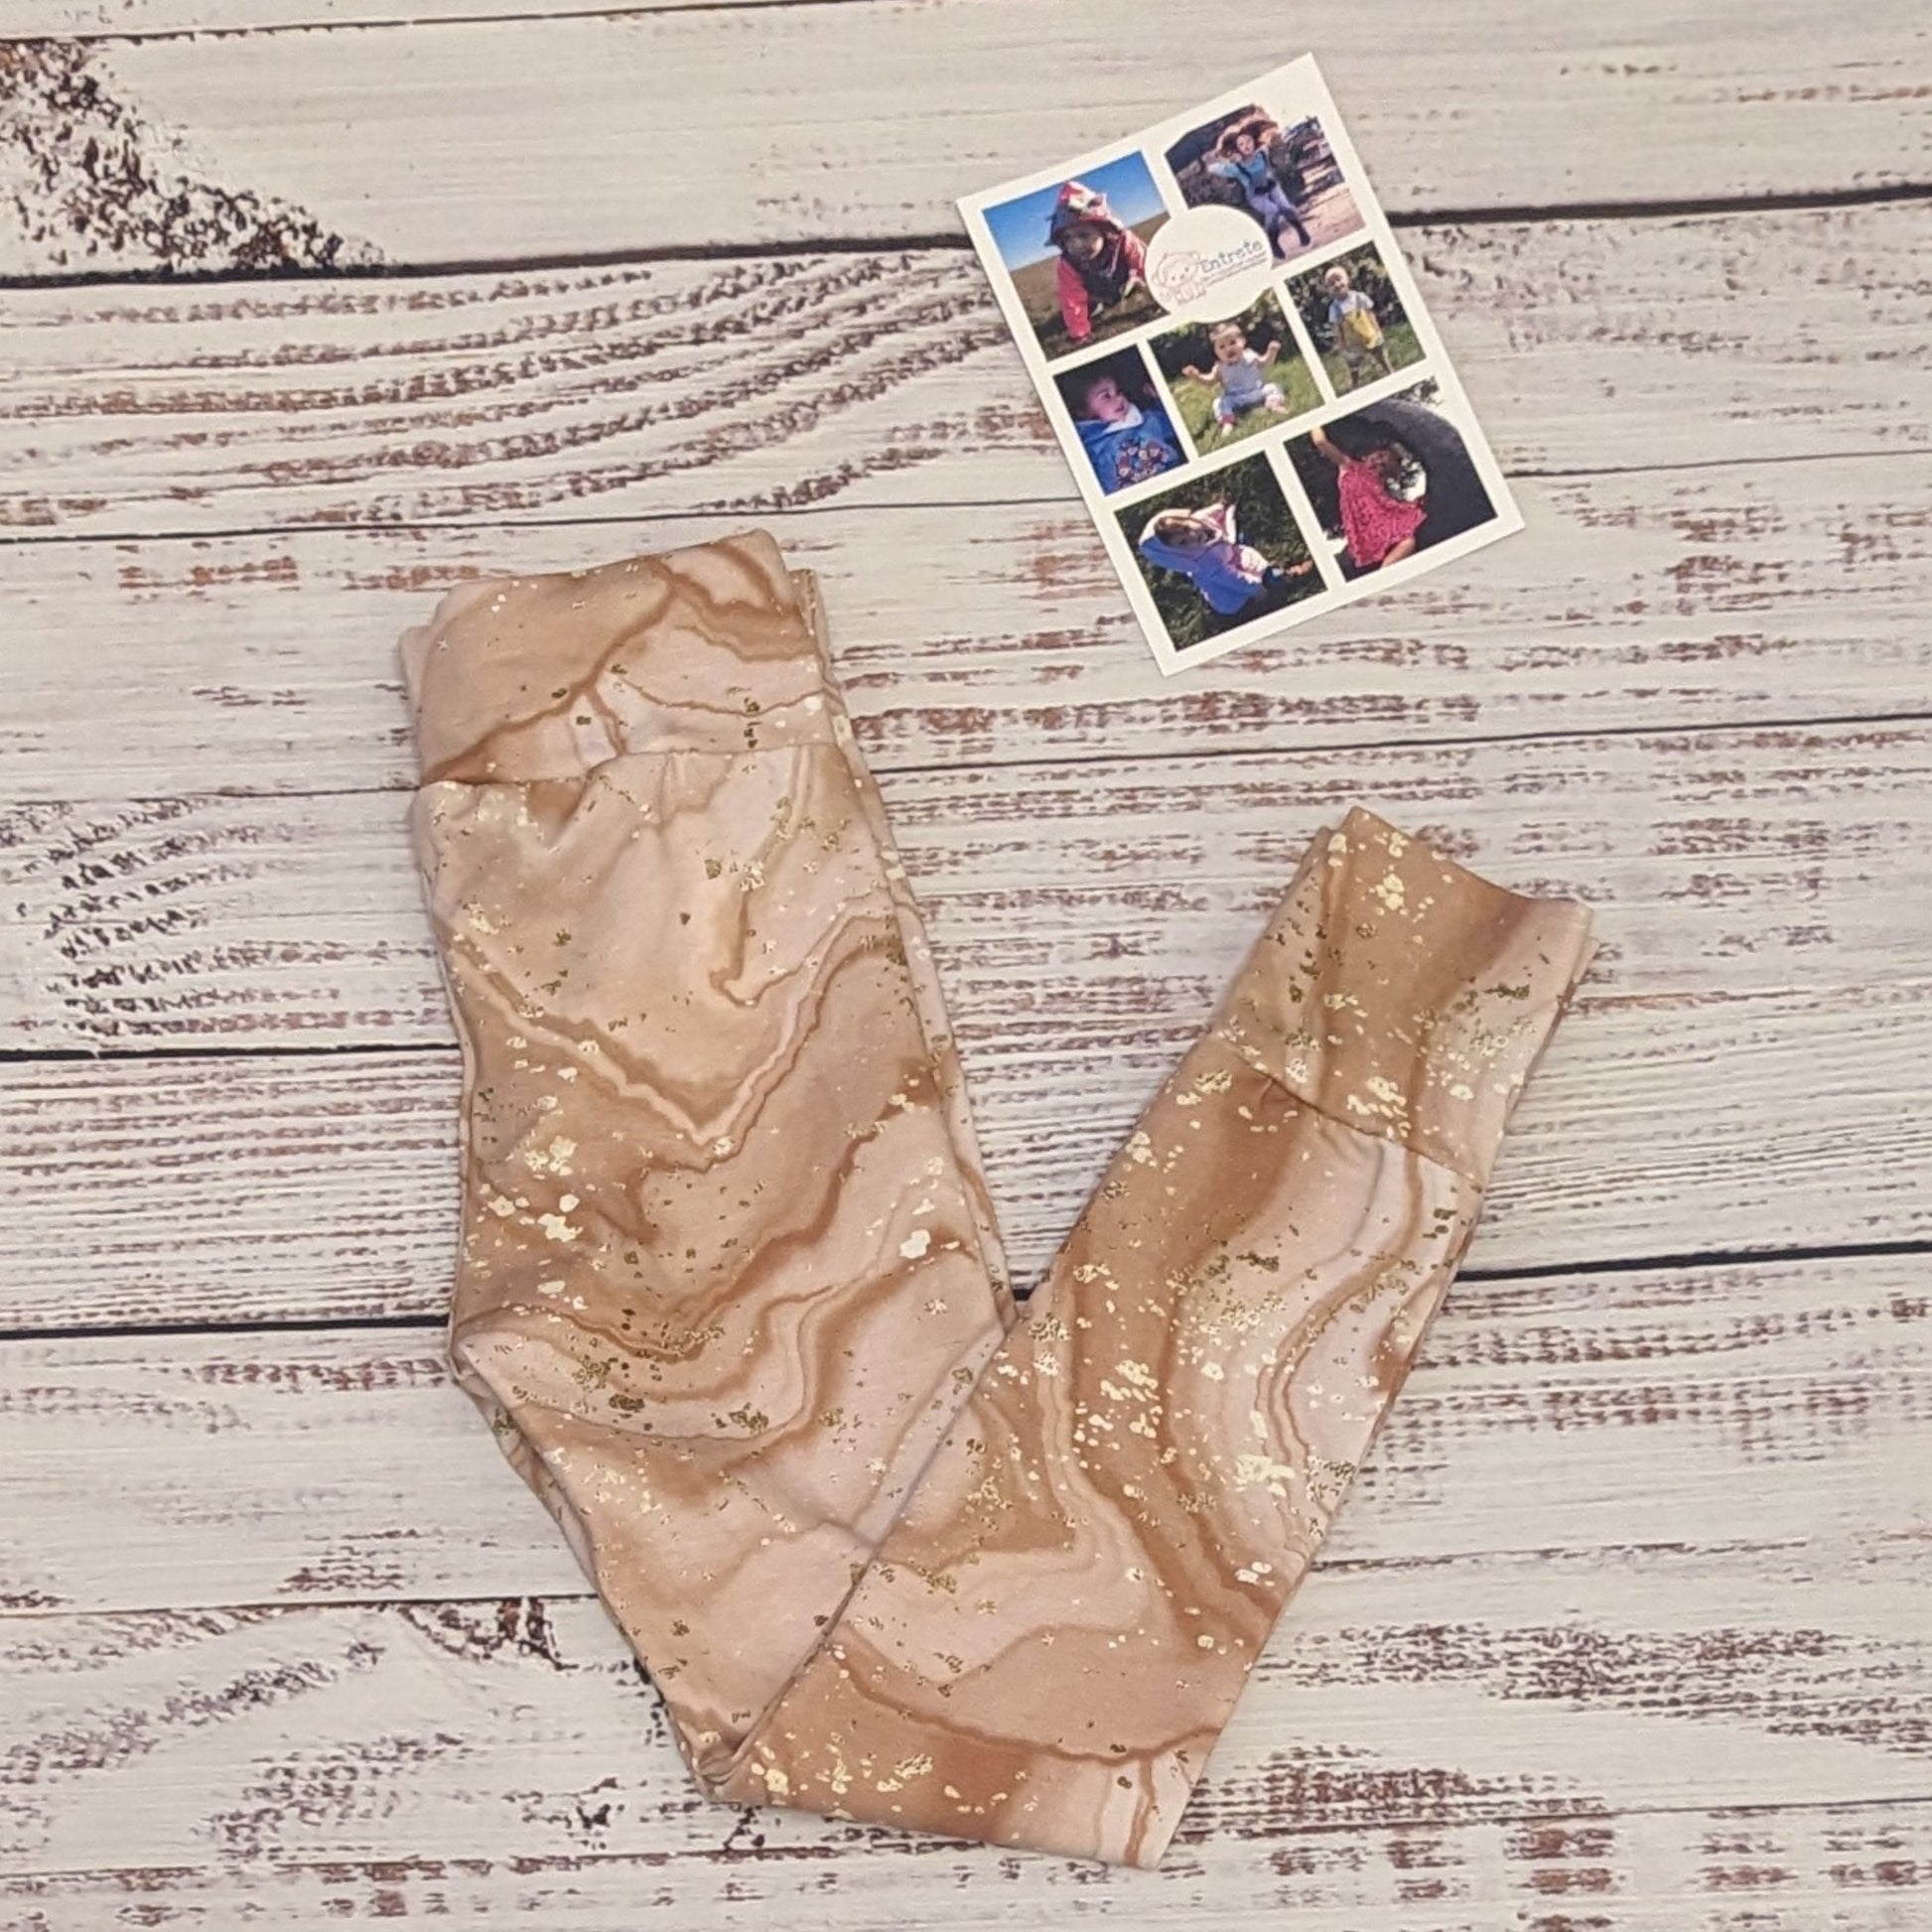 The unique dusty pink marbled kid's leggings with their iced coffee appearance. Handmade using dusty pink marble cotton jersey. Shown folded.